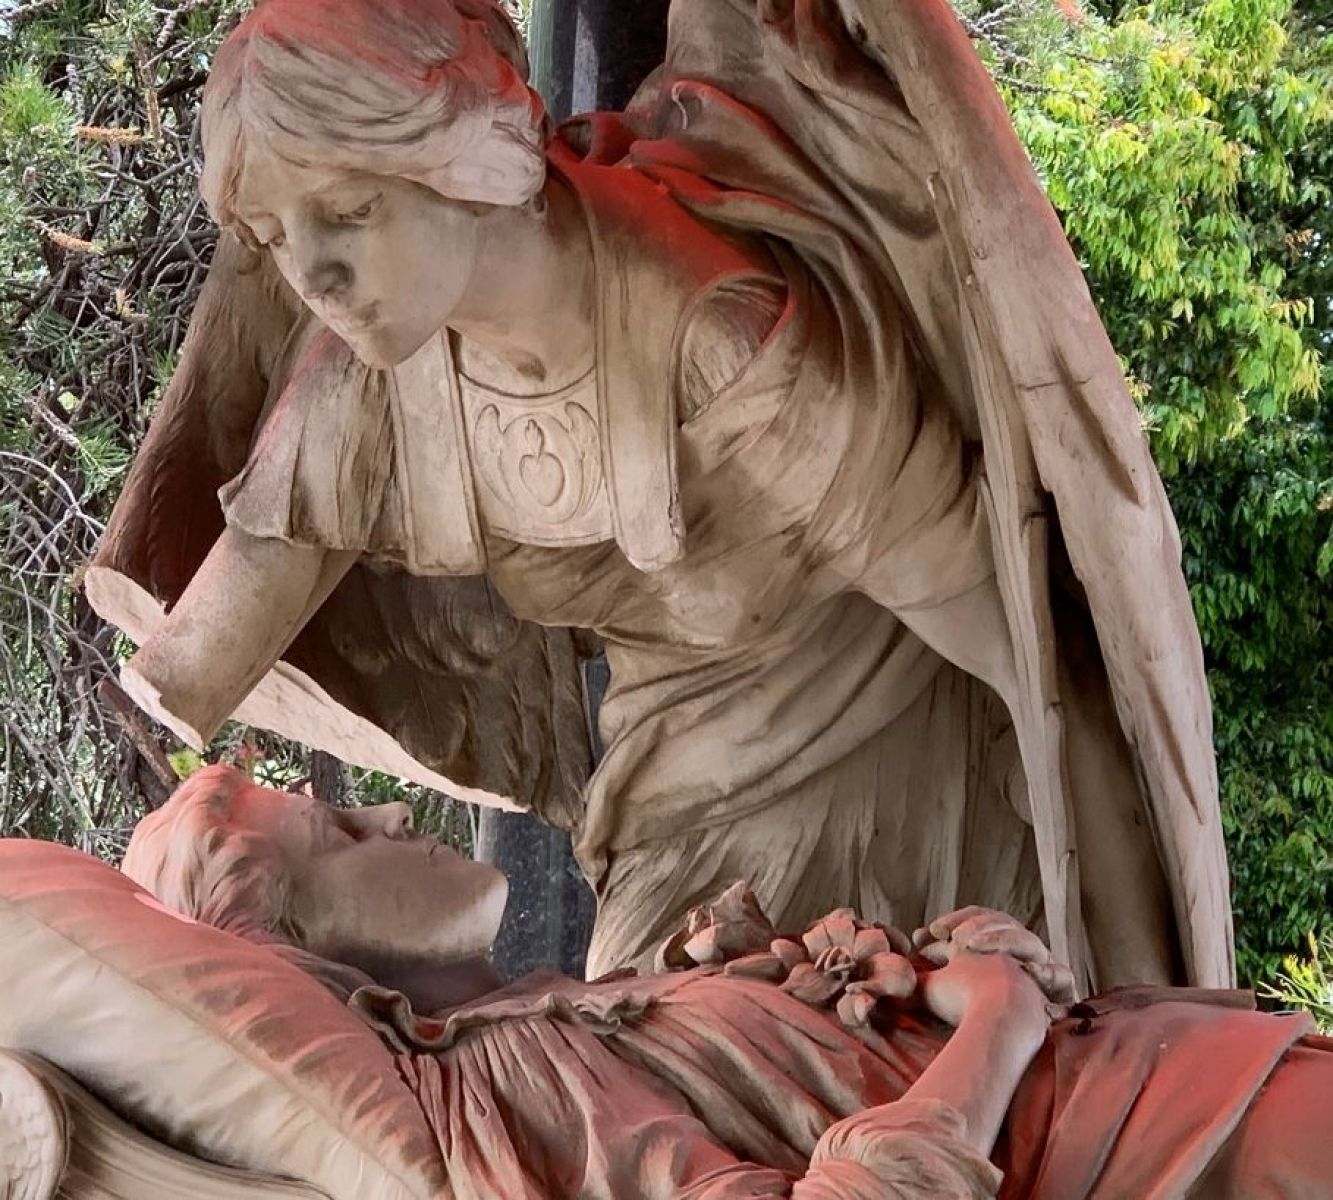 Two memorial statues can be seen in the image. An angel looks over a sick person as they lay in bed. 